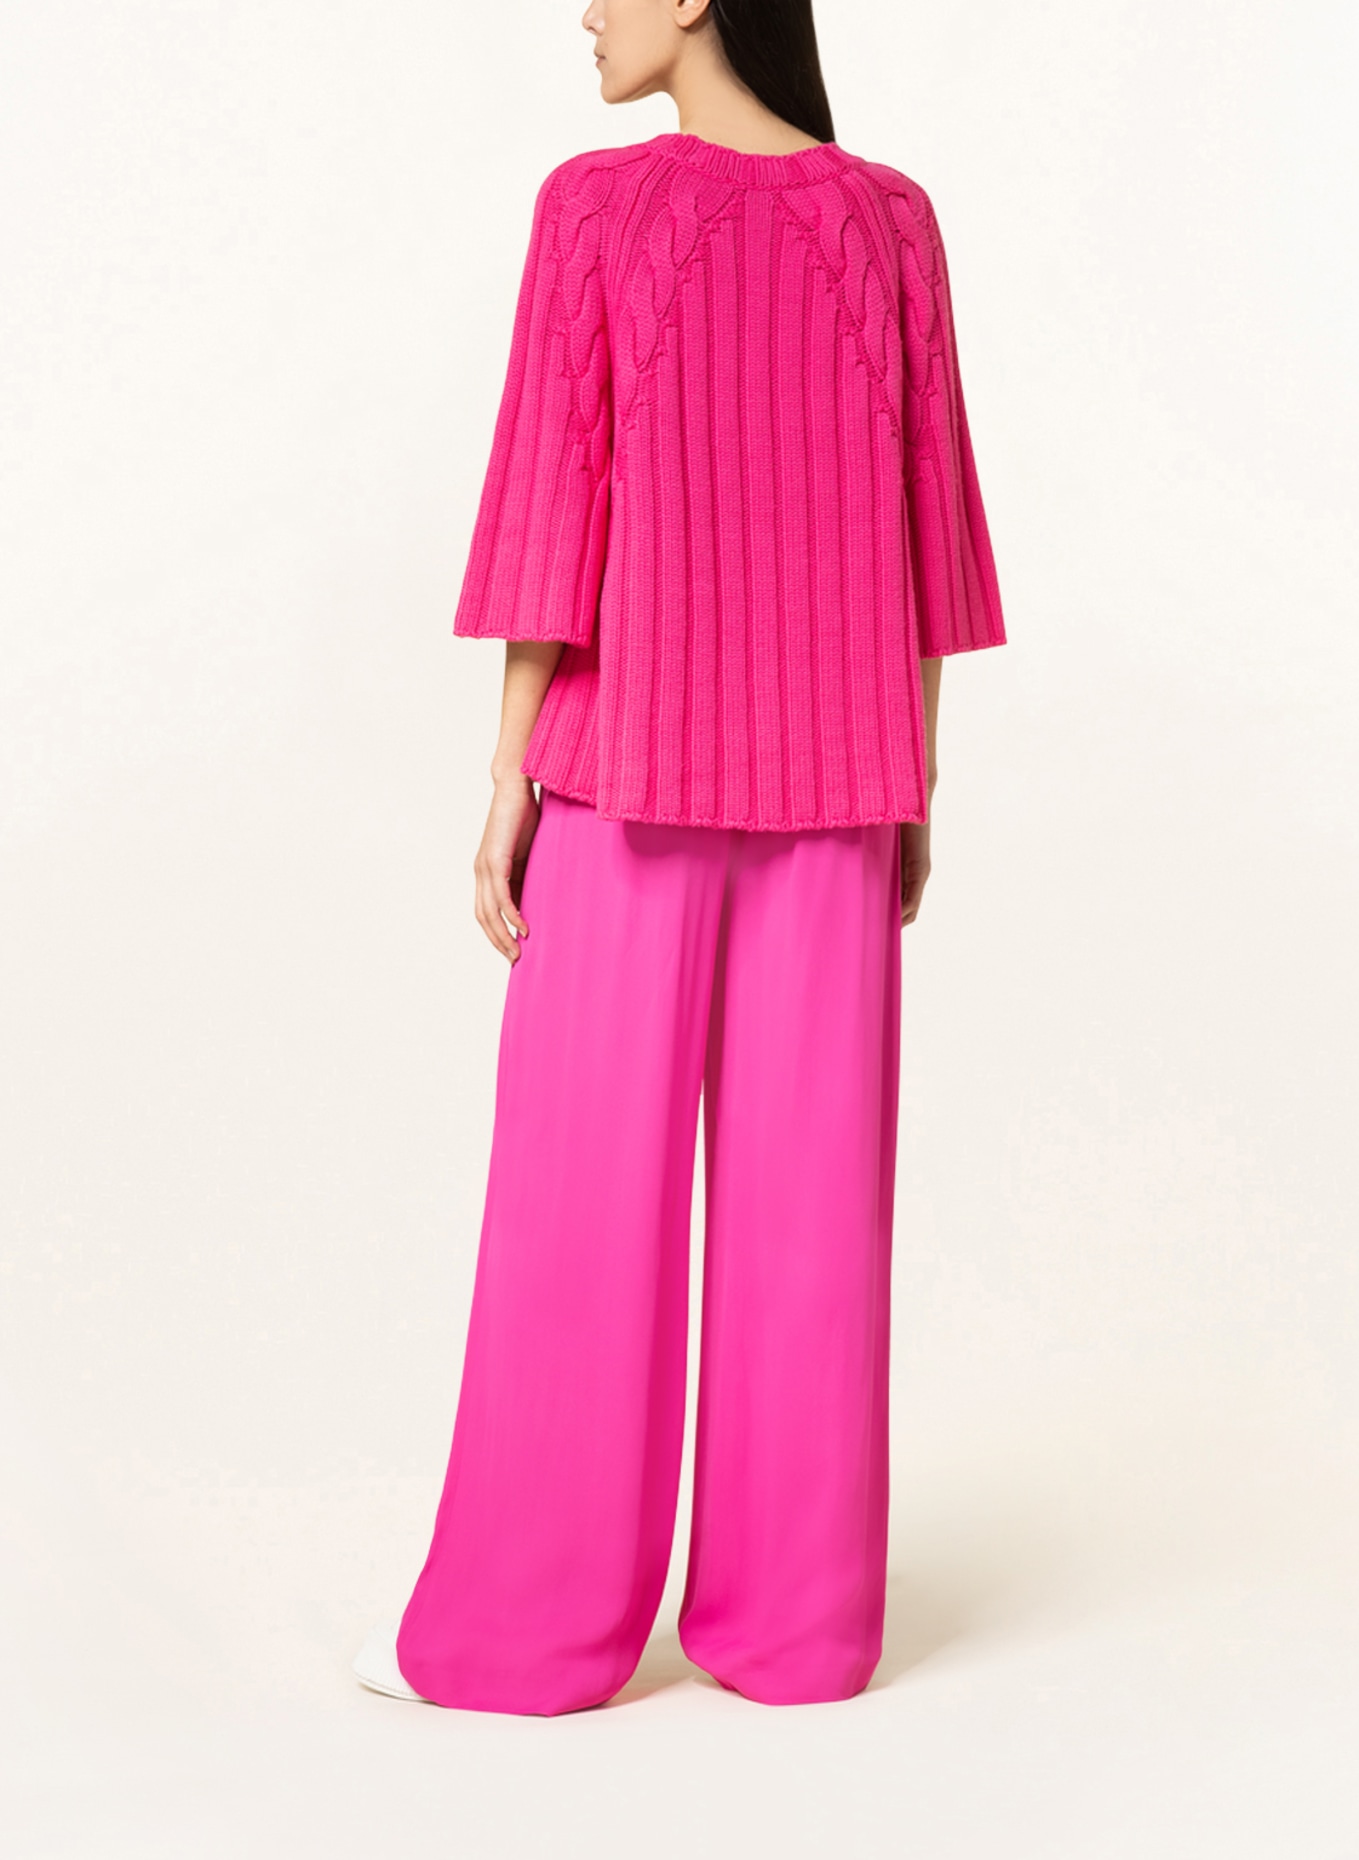 FABIANA FILIPPI Sweater made of merino wool with 3/4 sleeves, Color: PINK (Image 3)